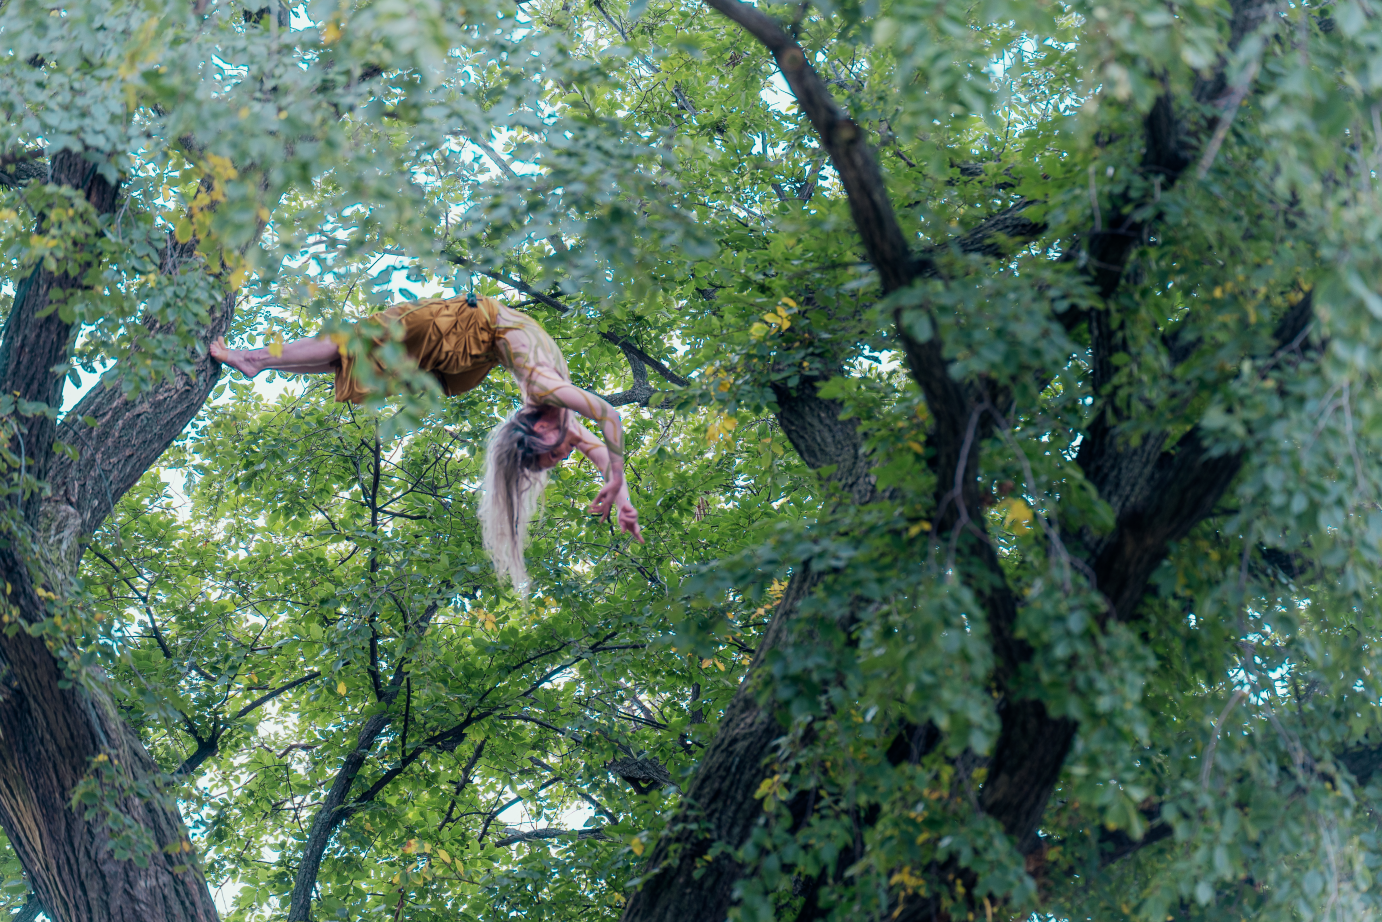 Lisa Giobbi is high in a tree, her body parallel to the ground. Both arms are extended, and her back is arched.